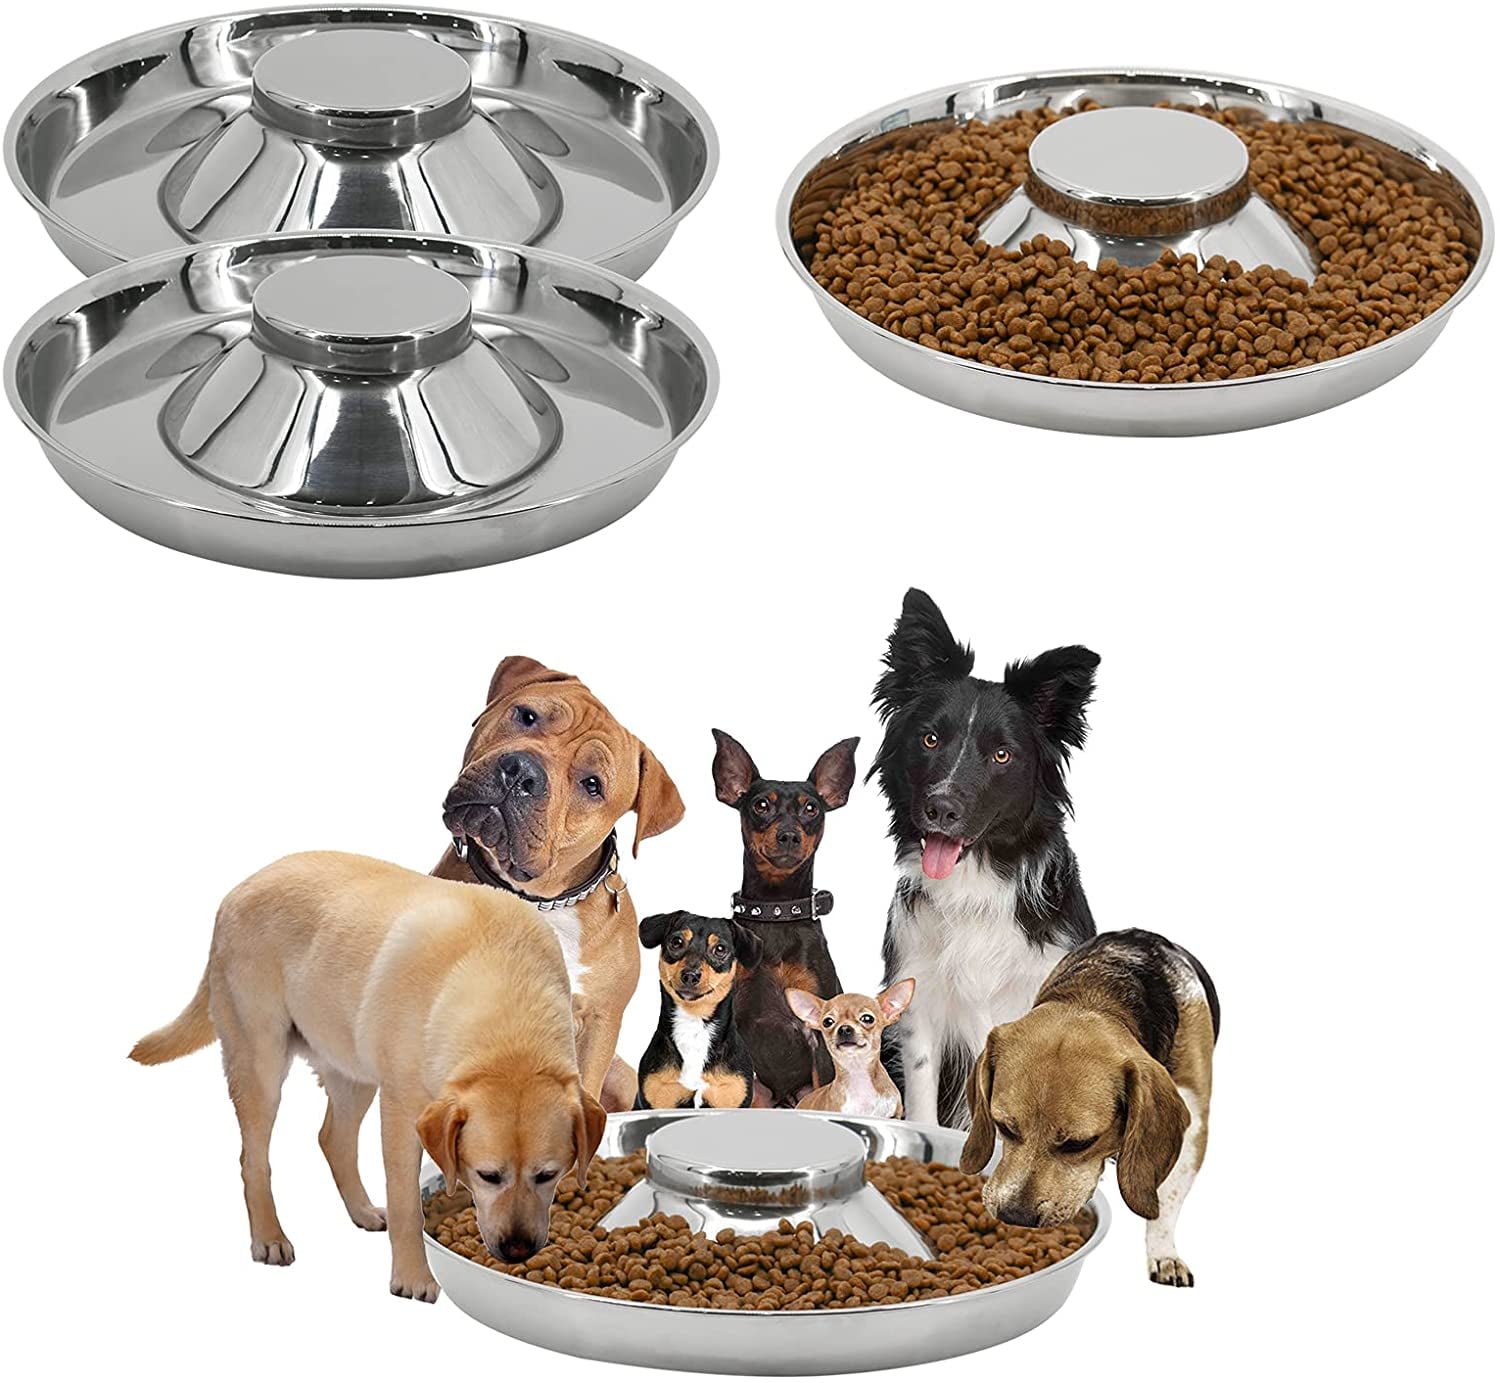 Pet feeding. Pets Ceramic Double Bowl Dog Cat food Water Feeder Stand raised Ceramic dish Bowl Wooden Dining Table Pet Supplies.